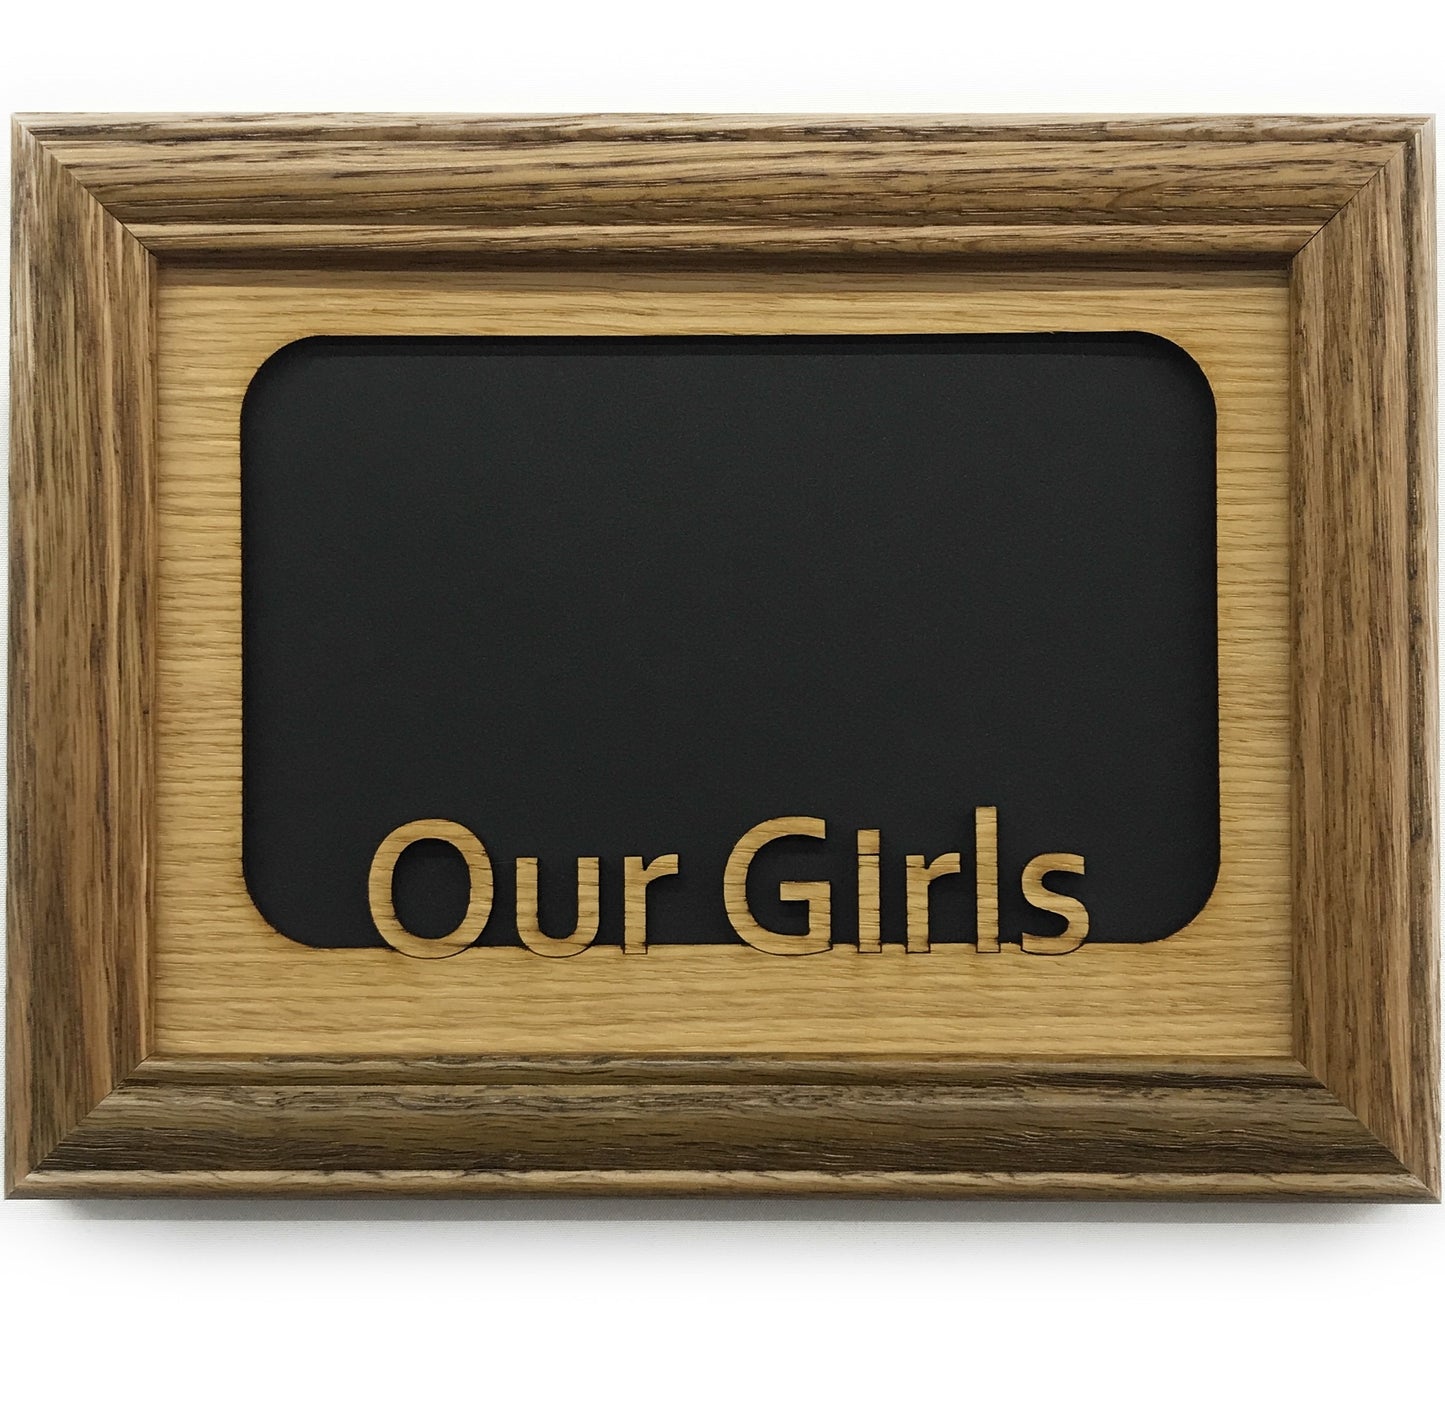 The Girls Picture Frame - 5x7 Frame Hold 4x6 Photo